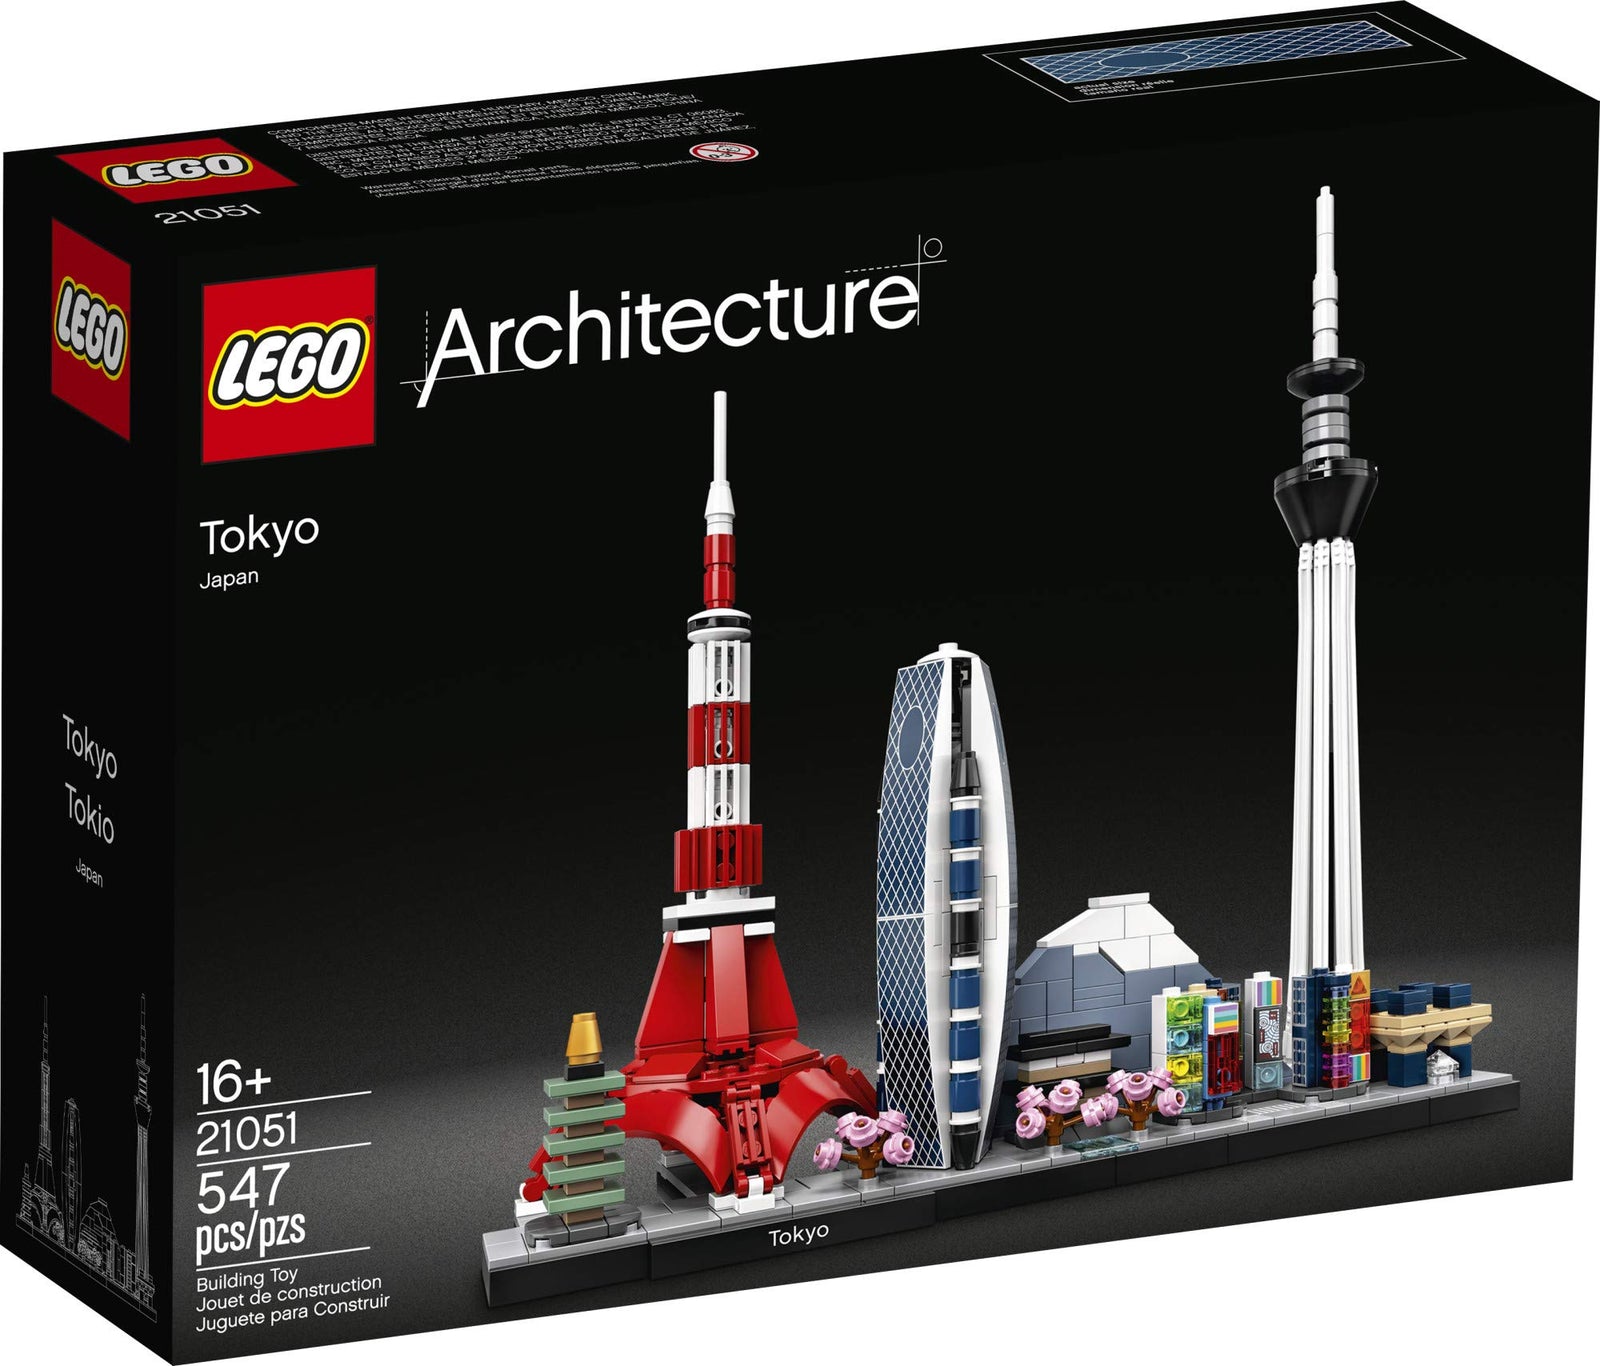 LEGO Architecture Skylines: Tokyo 21051 Building Kit, Collectible Architecture Building Set for Adults (547 Pieces)